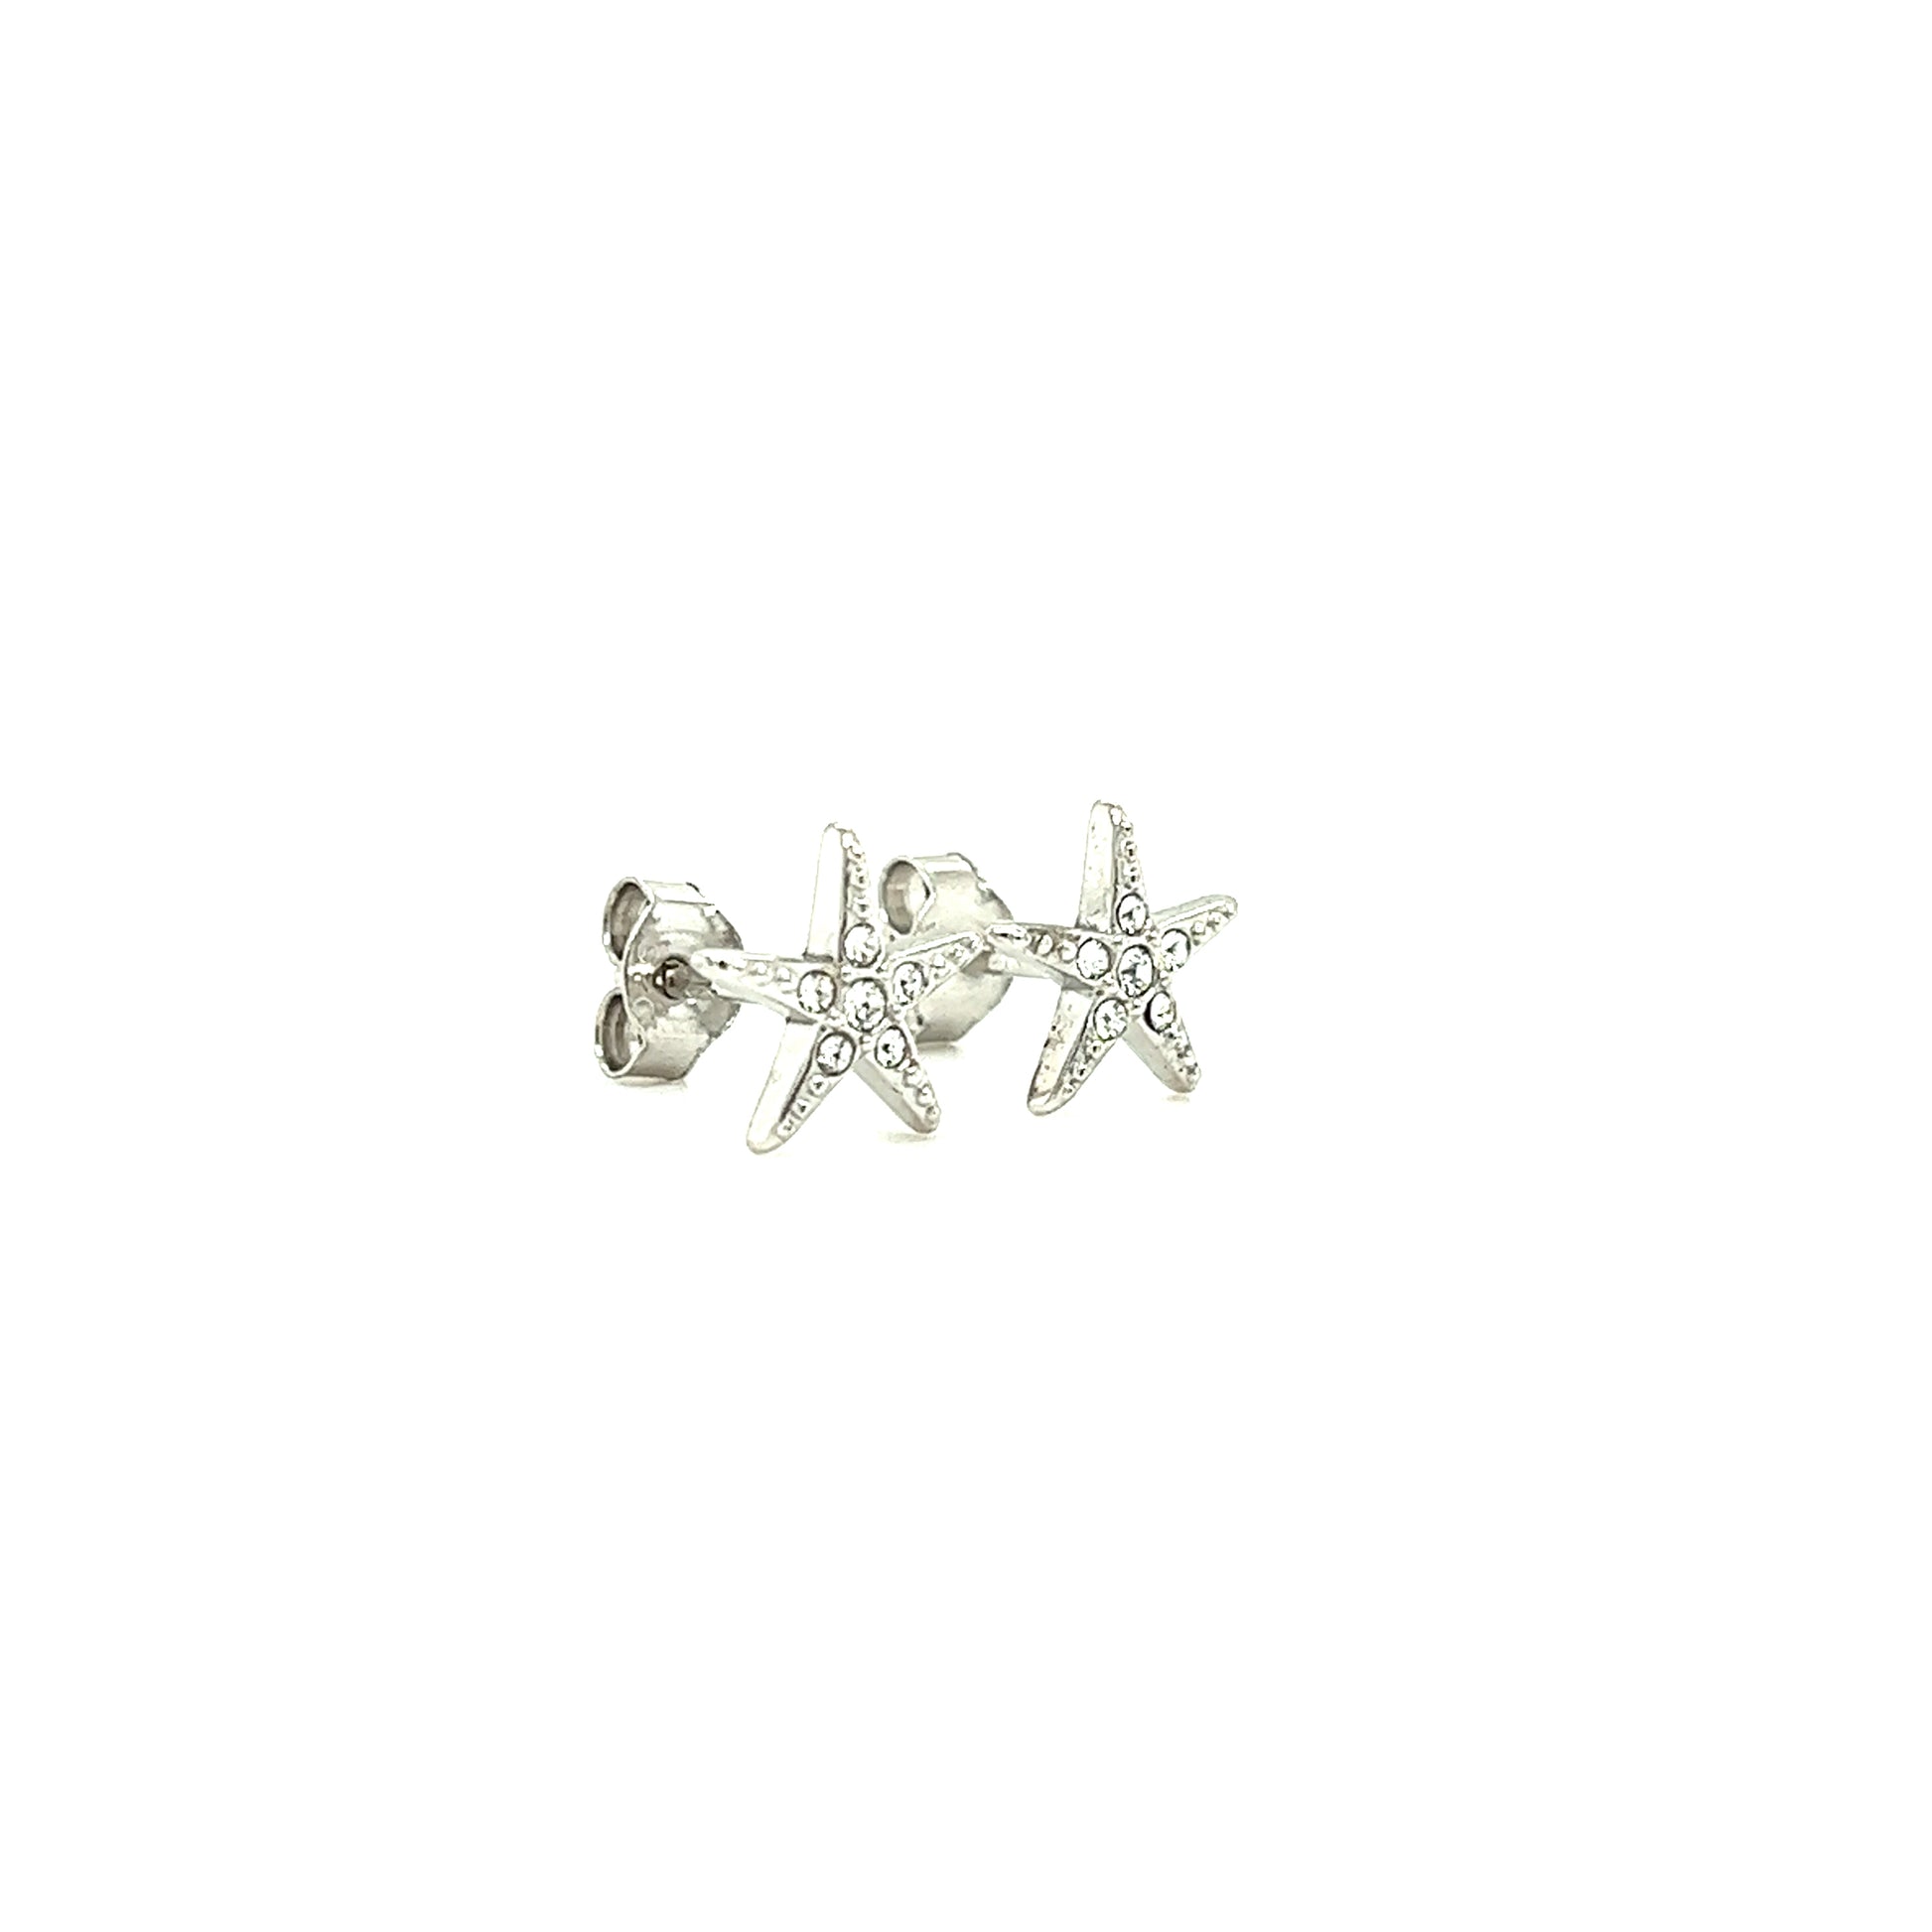 Starfish Stud Earrings with White Crystals in Sterling Silver Left Side View